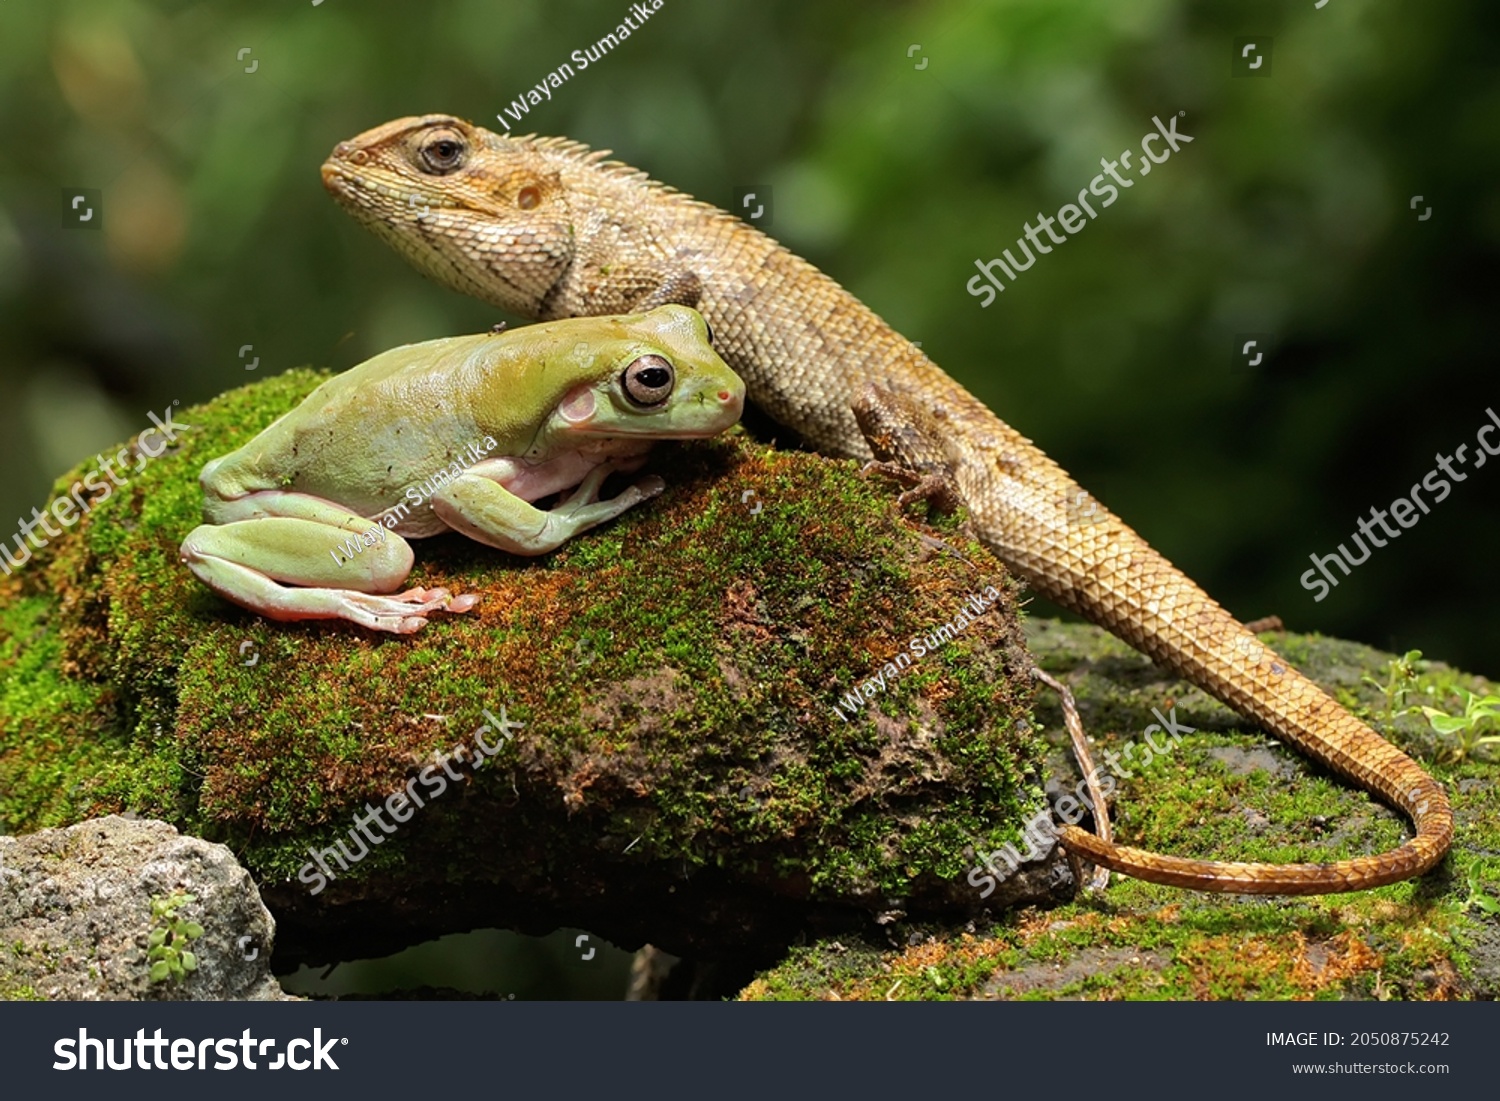 An oriental garden lizard is sunbathing with a dumpy frog on a moss-covered rock. This reptile has the scientific name Calotes versicolor.  #2050875242